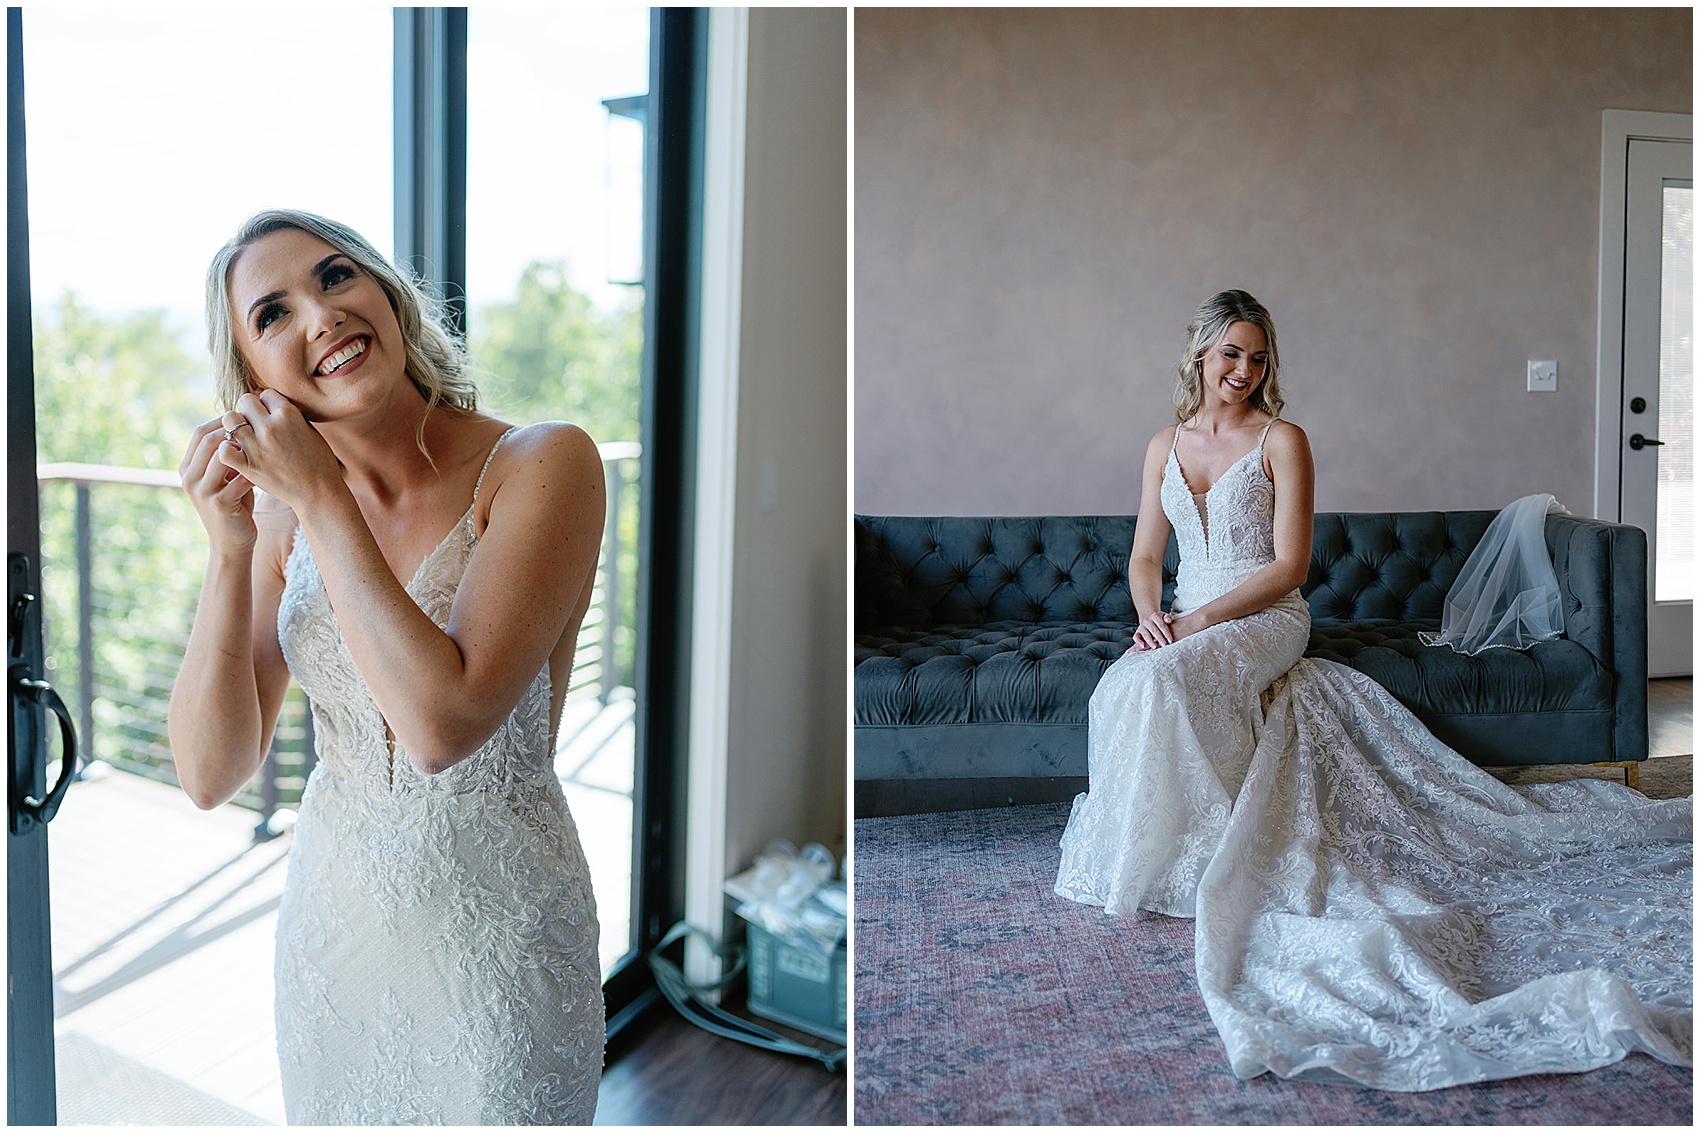 A bride sits on a couch and puts on her earrings in a white lace dress